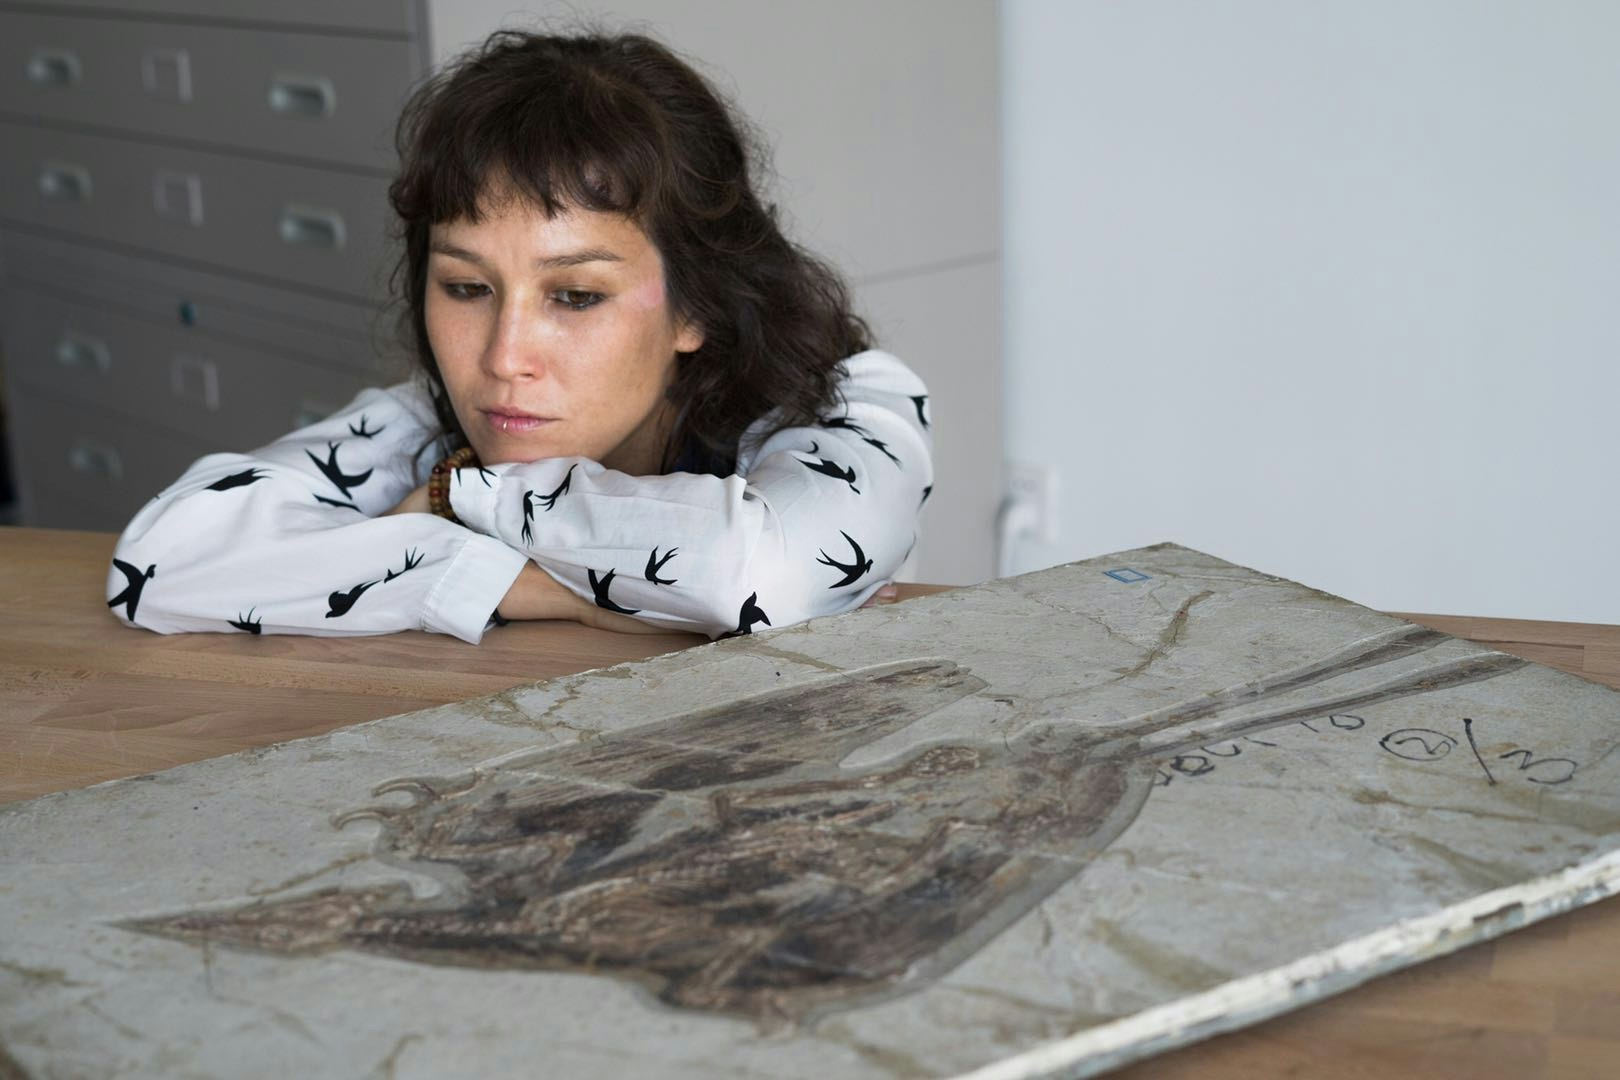 Paleontologist Jingmai O'Connor looking at a fossil of a dinosaur